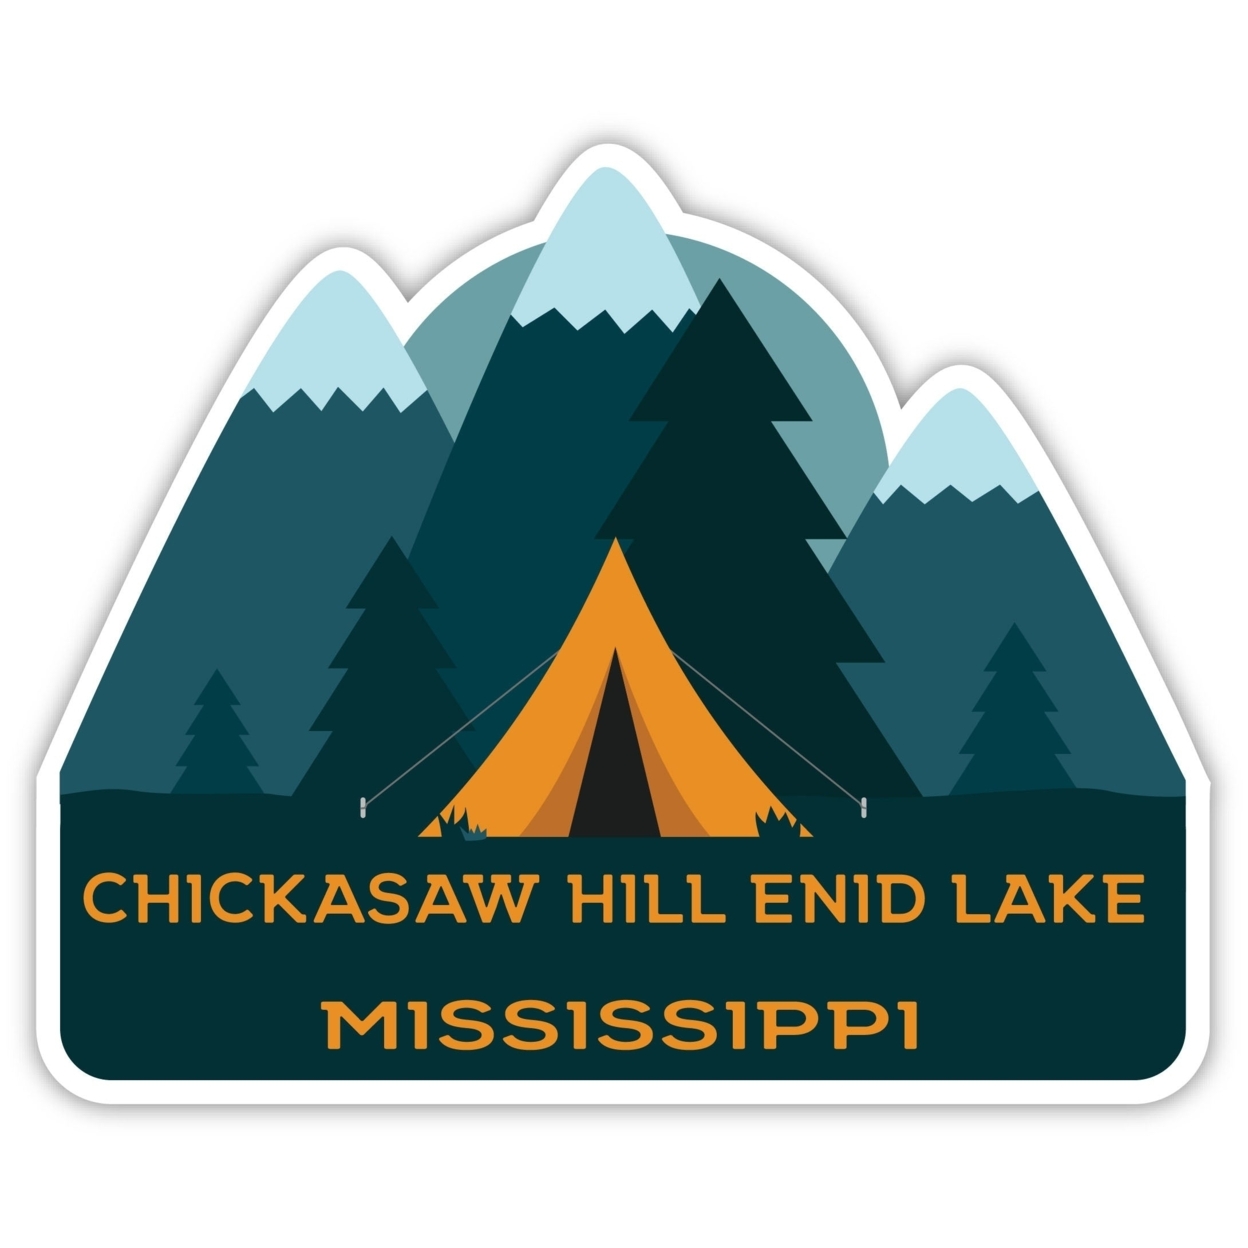 Chickasaw Hill Enid Lake Mississippi Souvenir Decorative Stickers (Choose Theme And Size) - Single Unit, 2-Inch, Tent